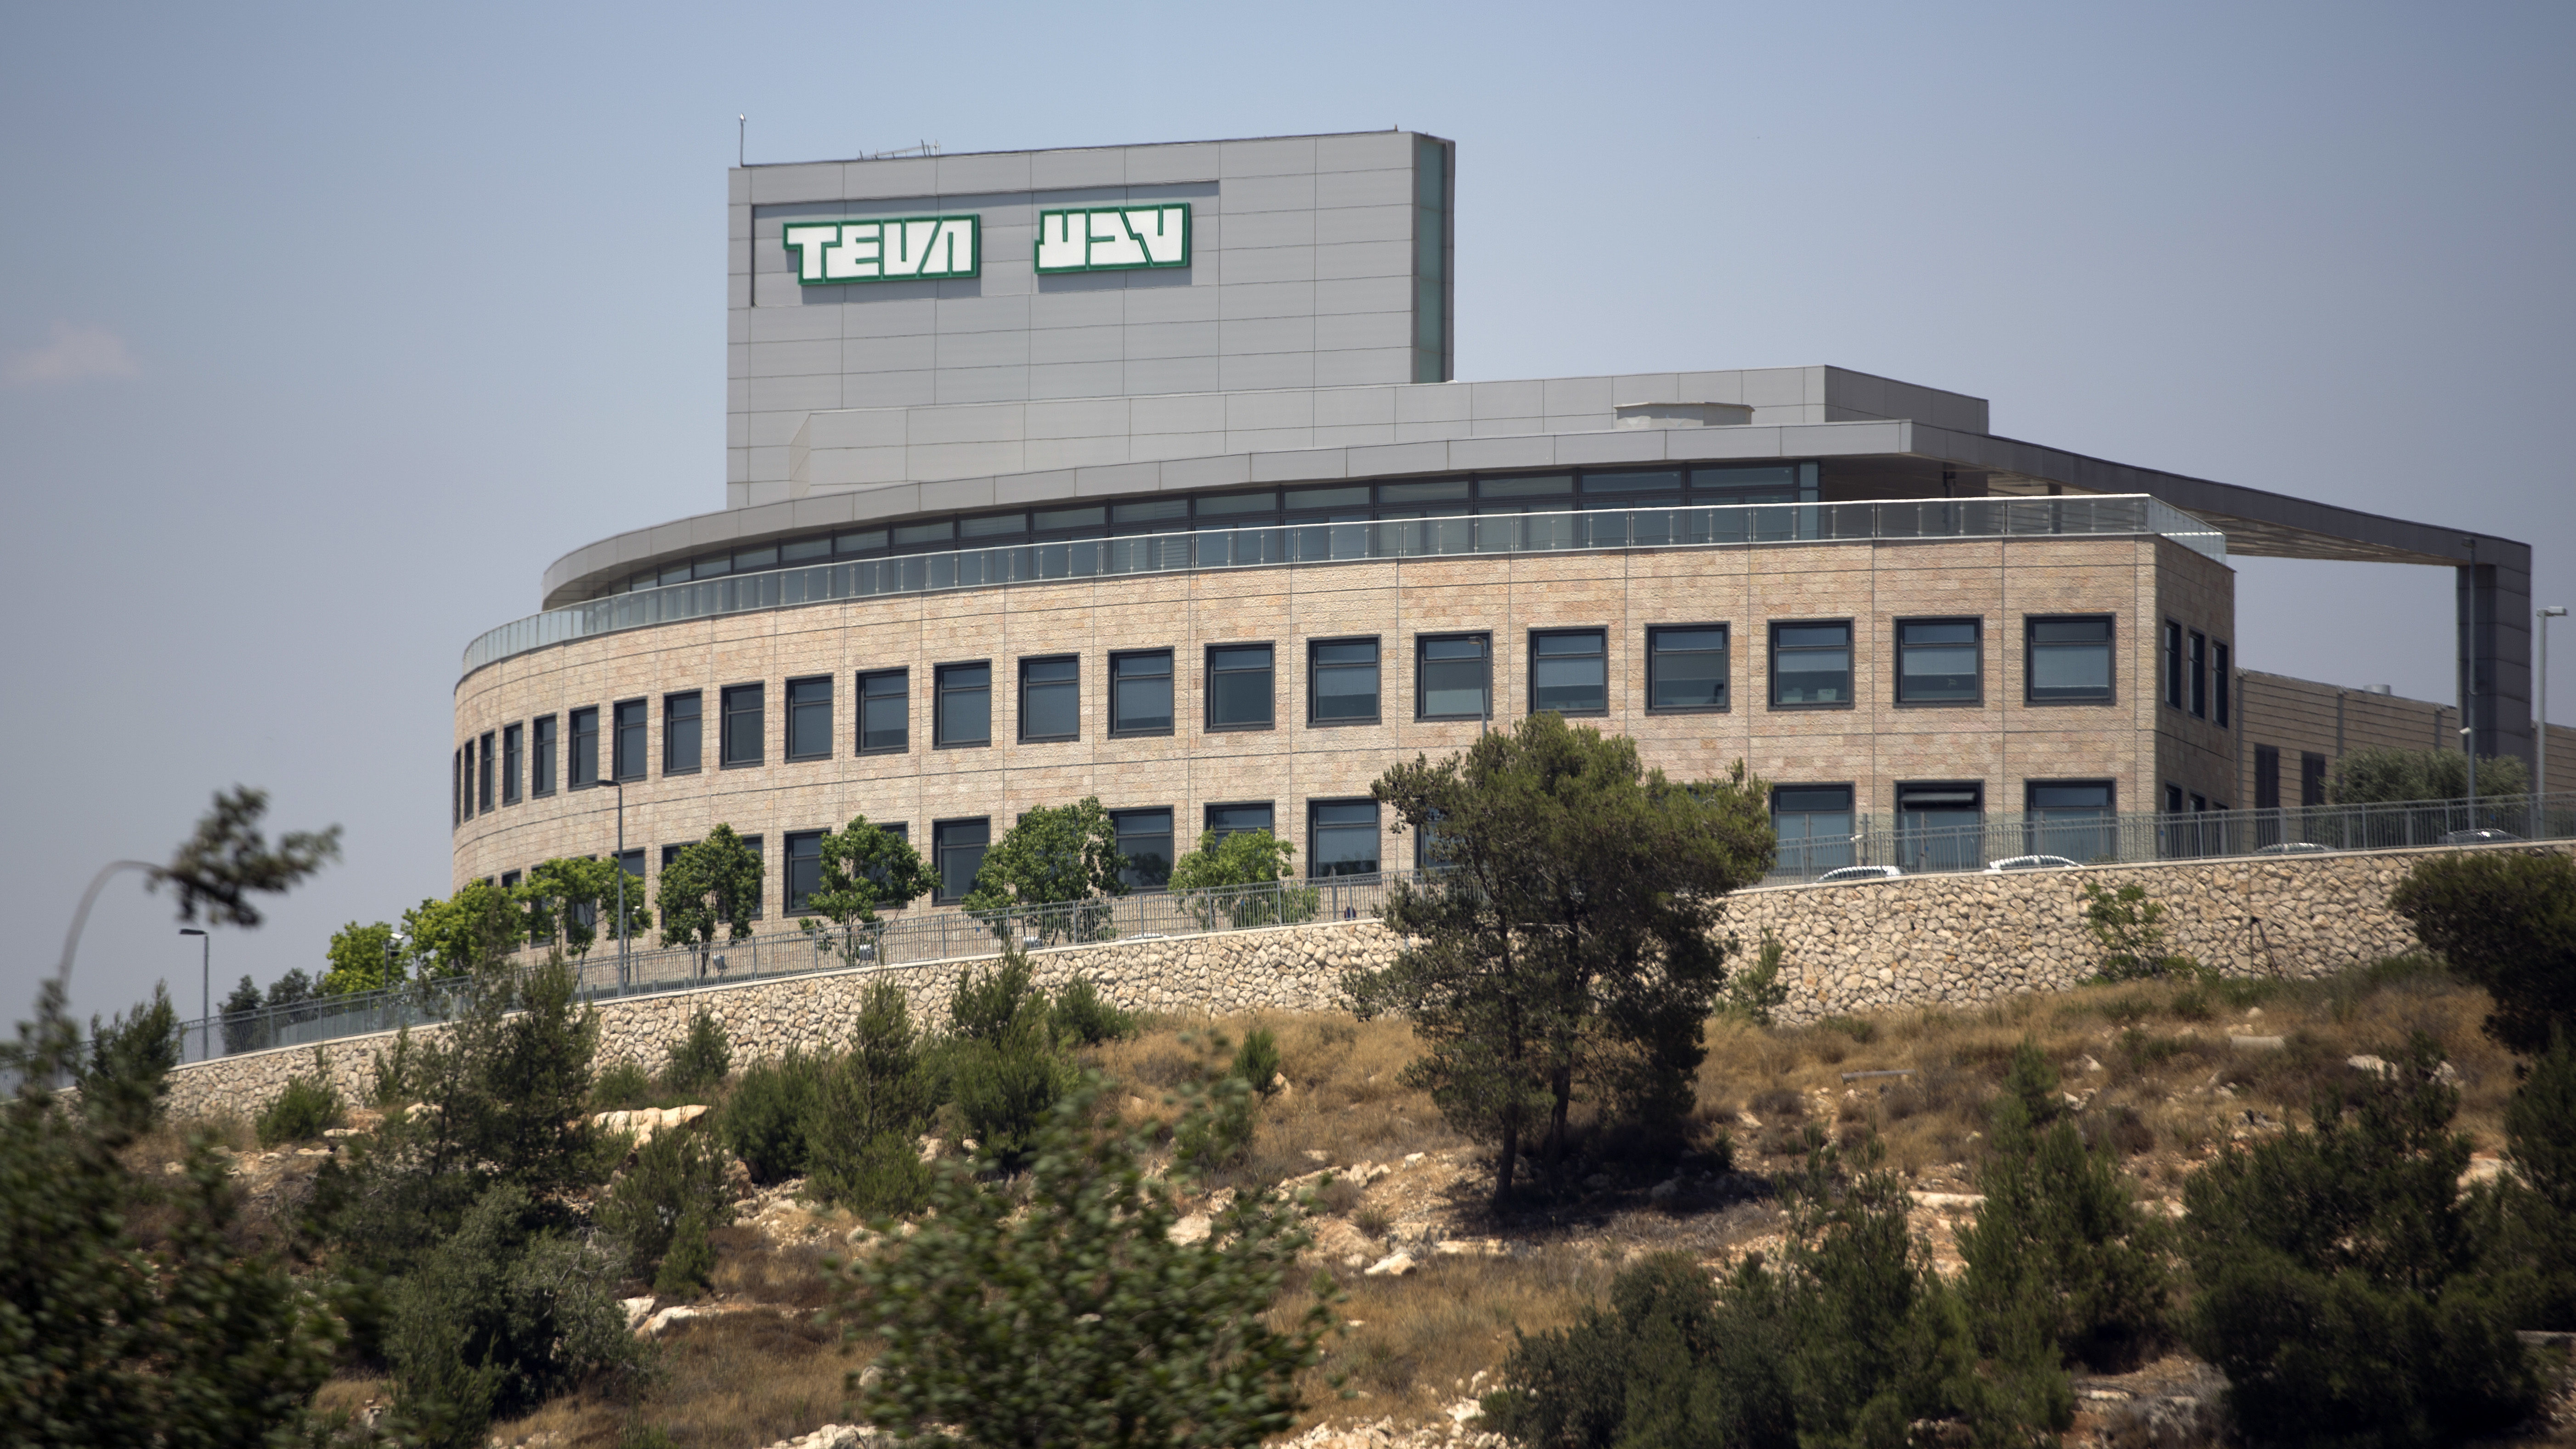 Teva’s Freefall: Any Chance for a Soft Landing? (AUDIO INTERVIEW)